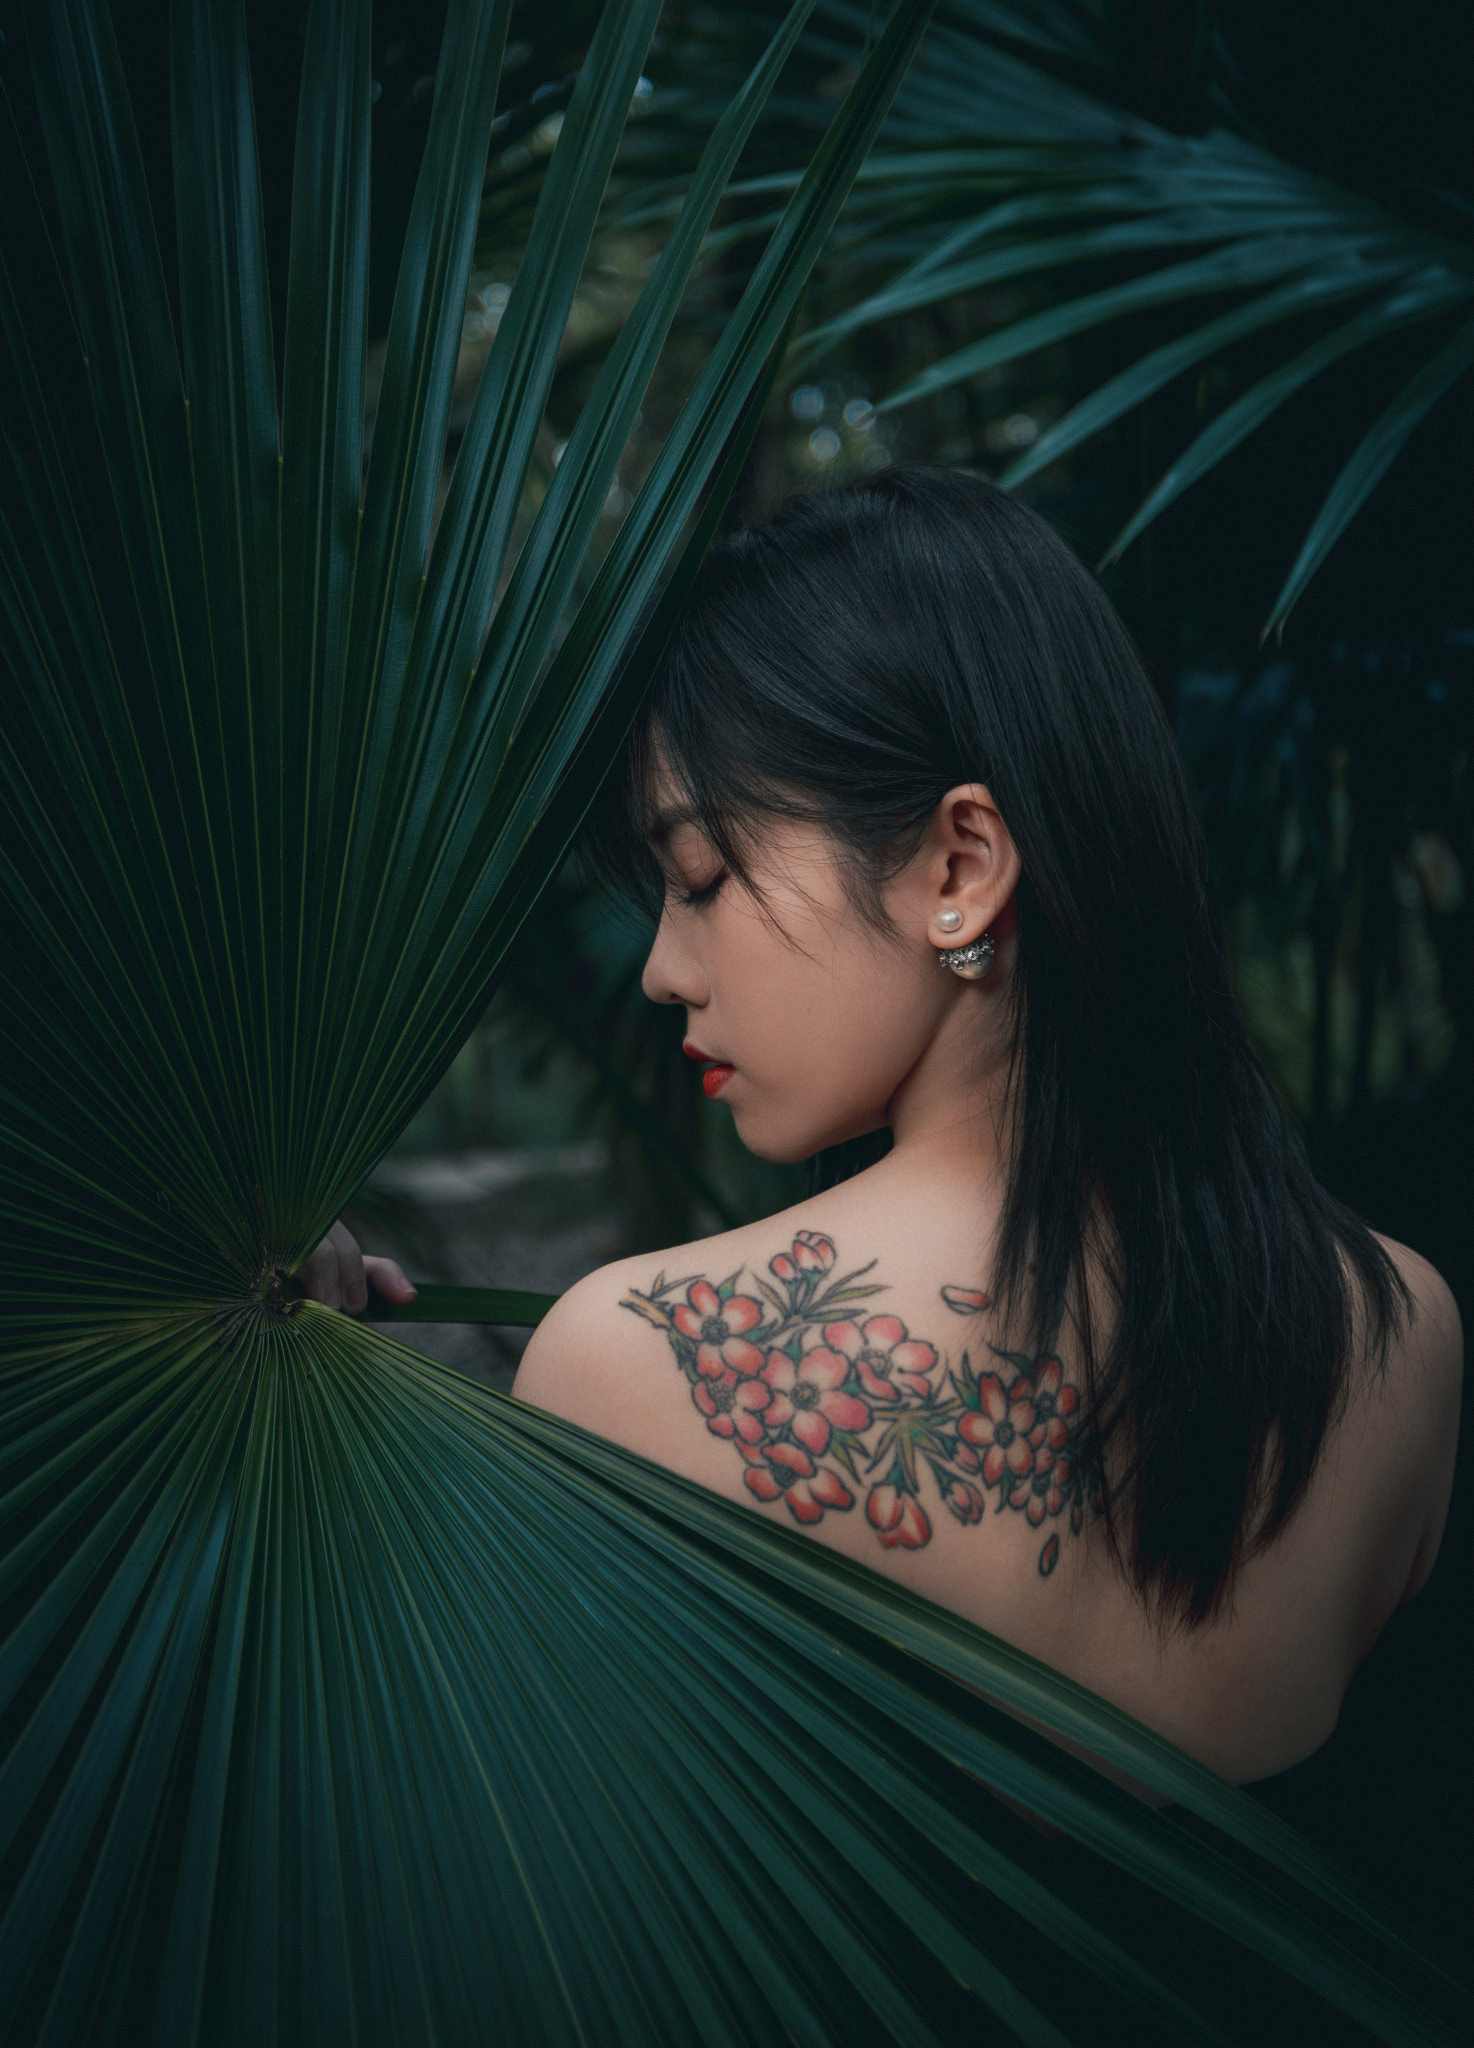 People 1474x2048 Qin Xiaoqiang women dark hair bare shoulders makeup Asian strapless dress leaves plants tattoo nature portrait